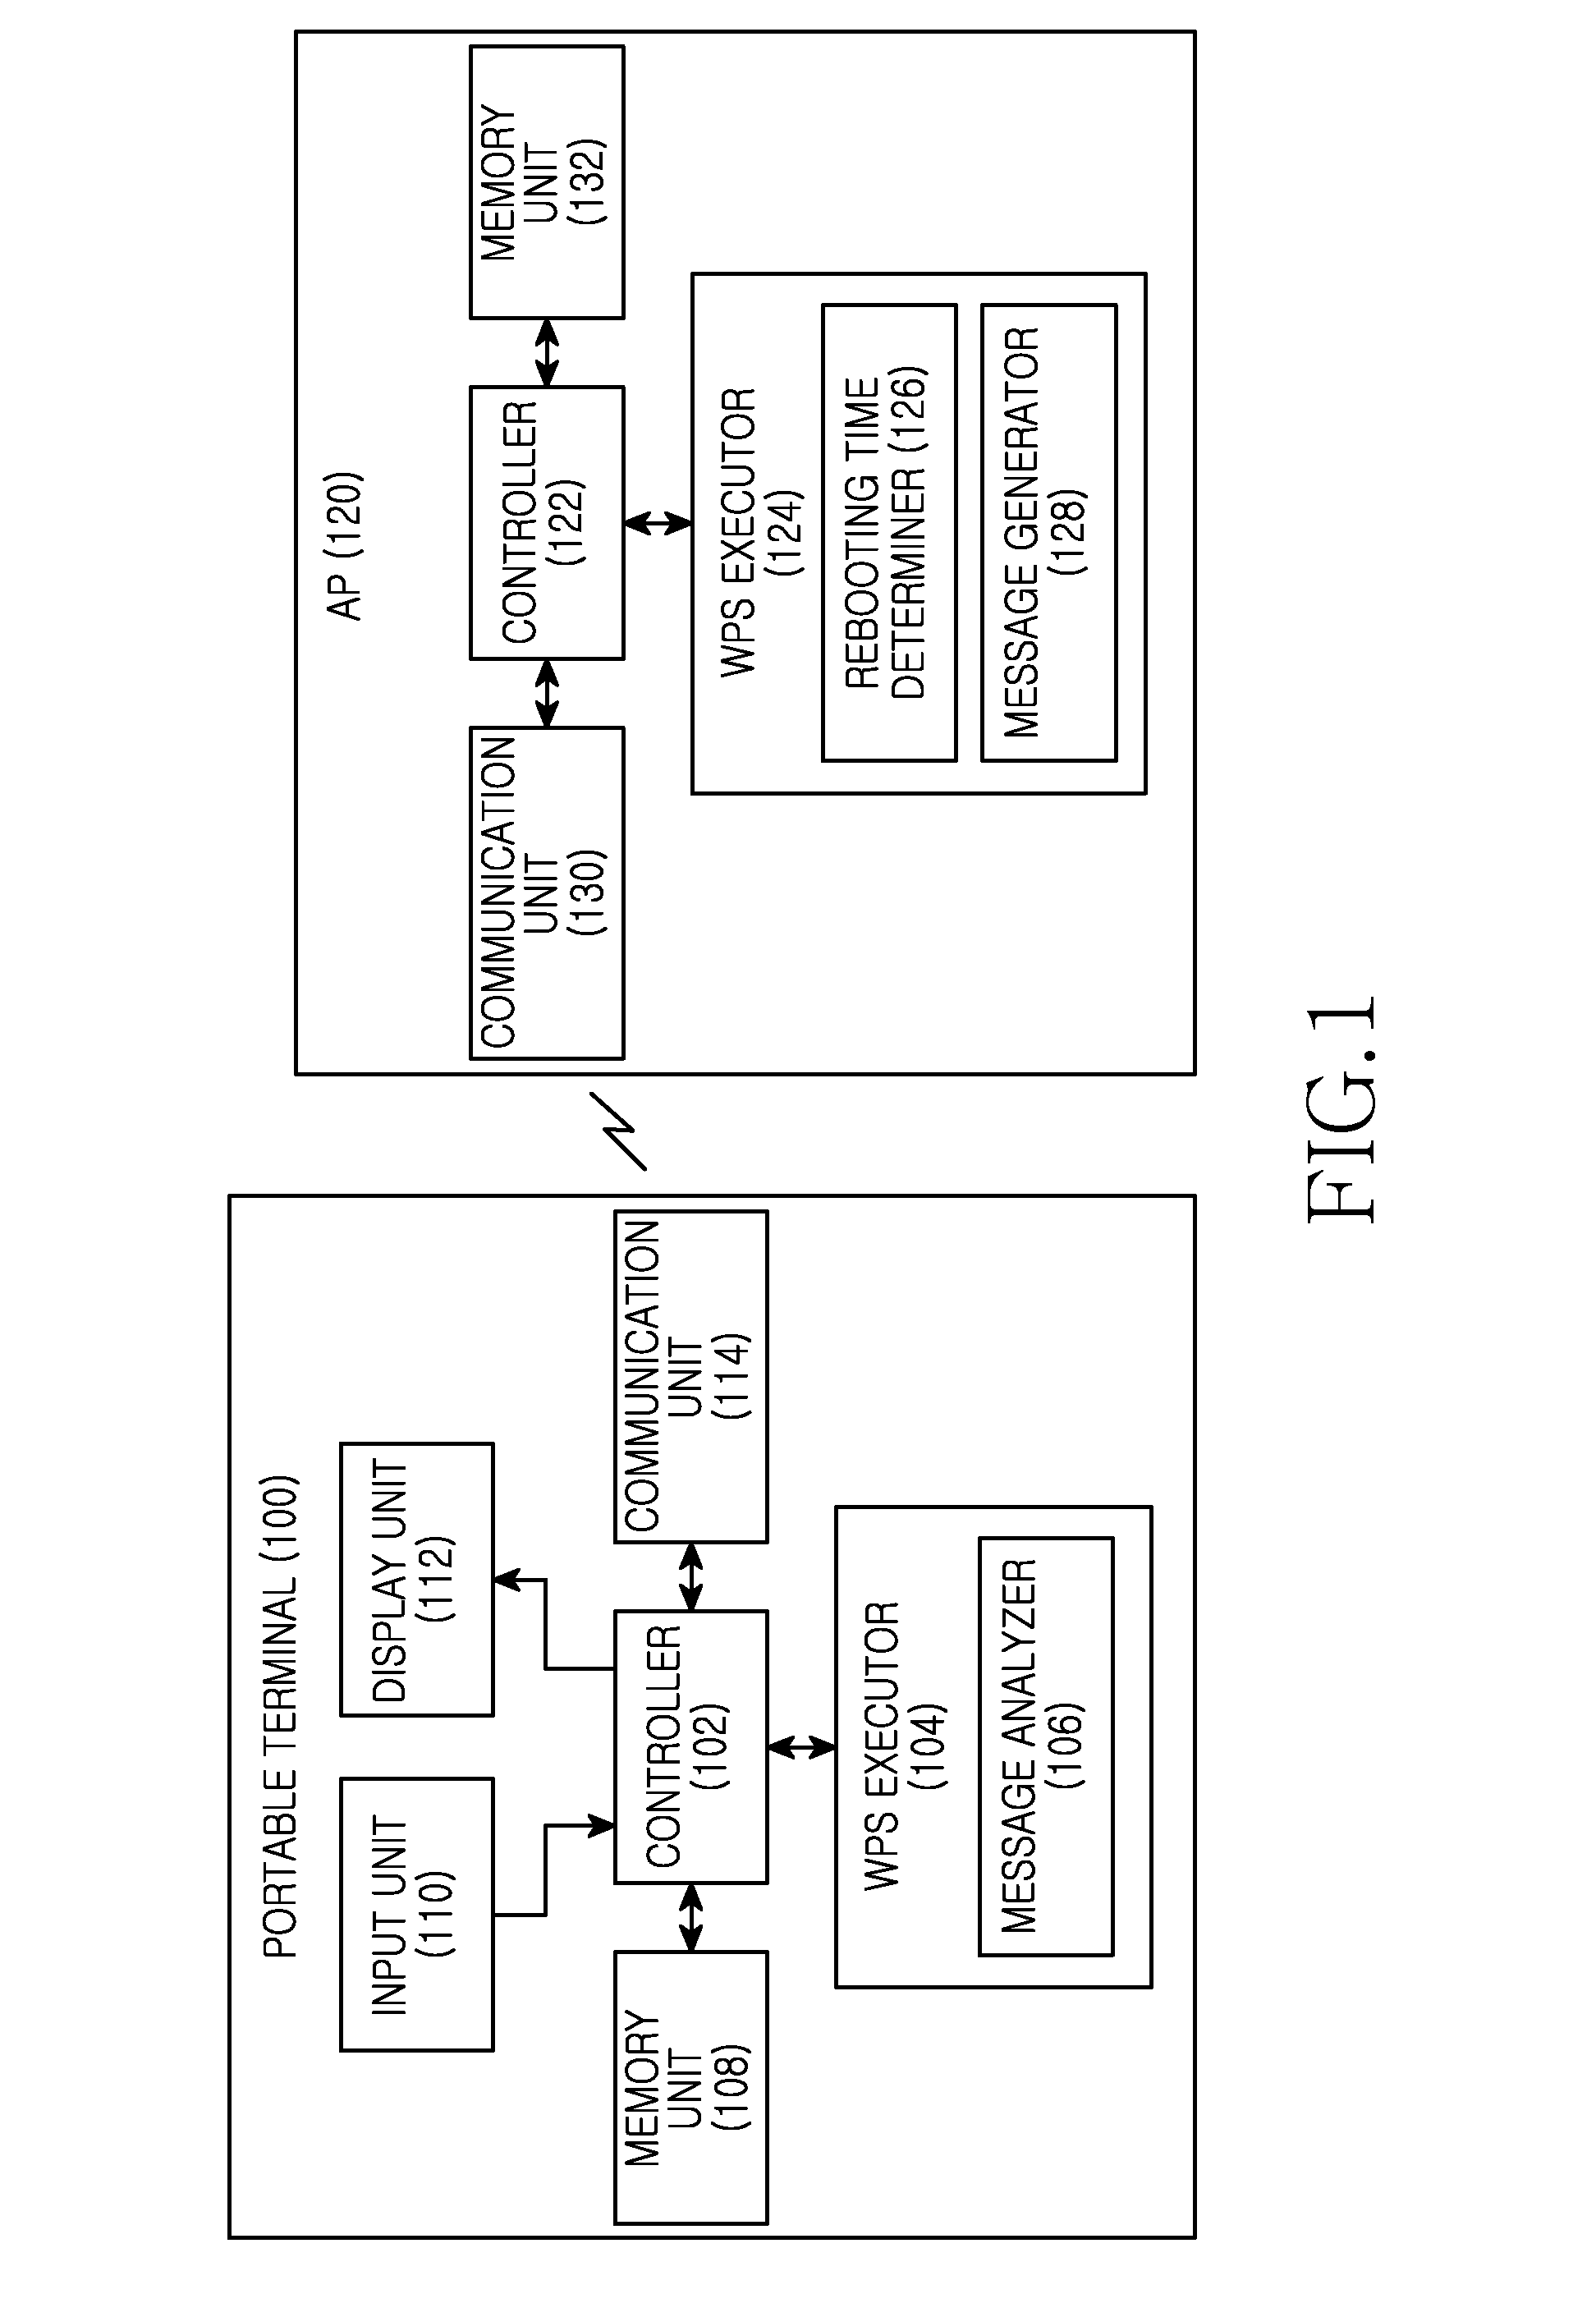 Apparatus and method for improving capability of wi-fi in wireless communication system